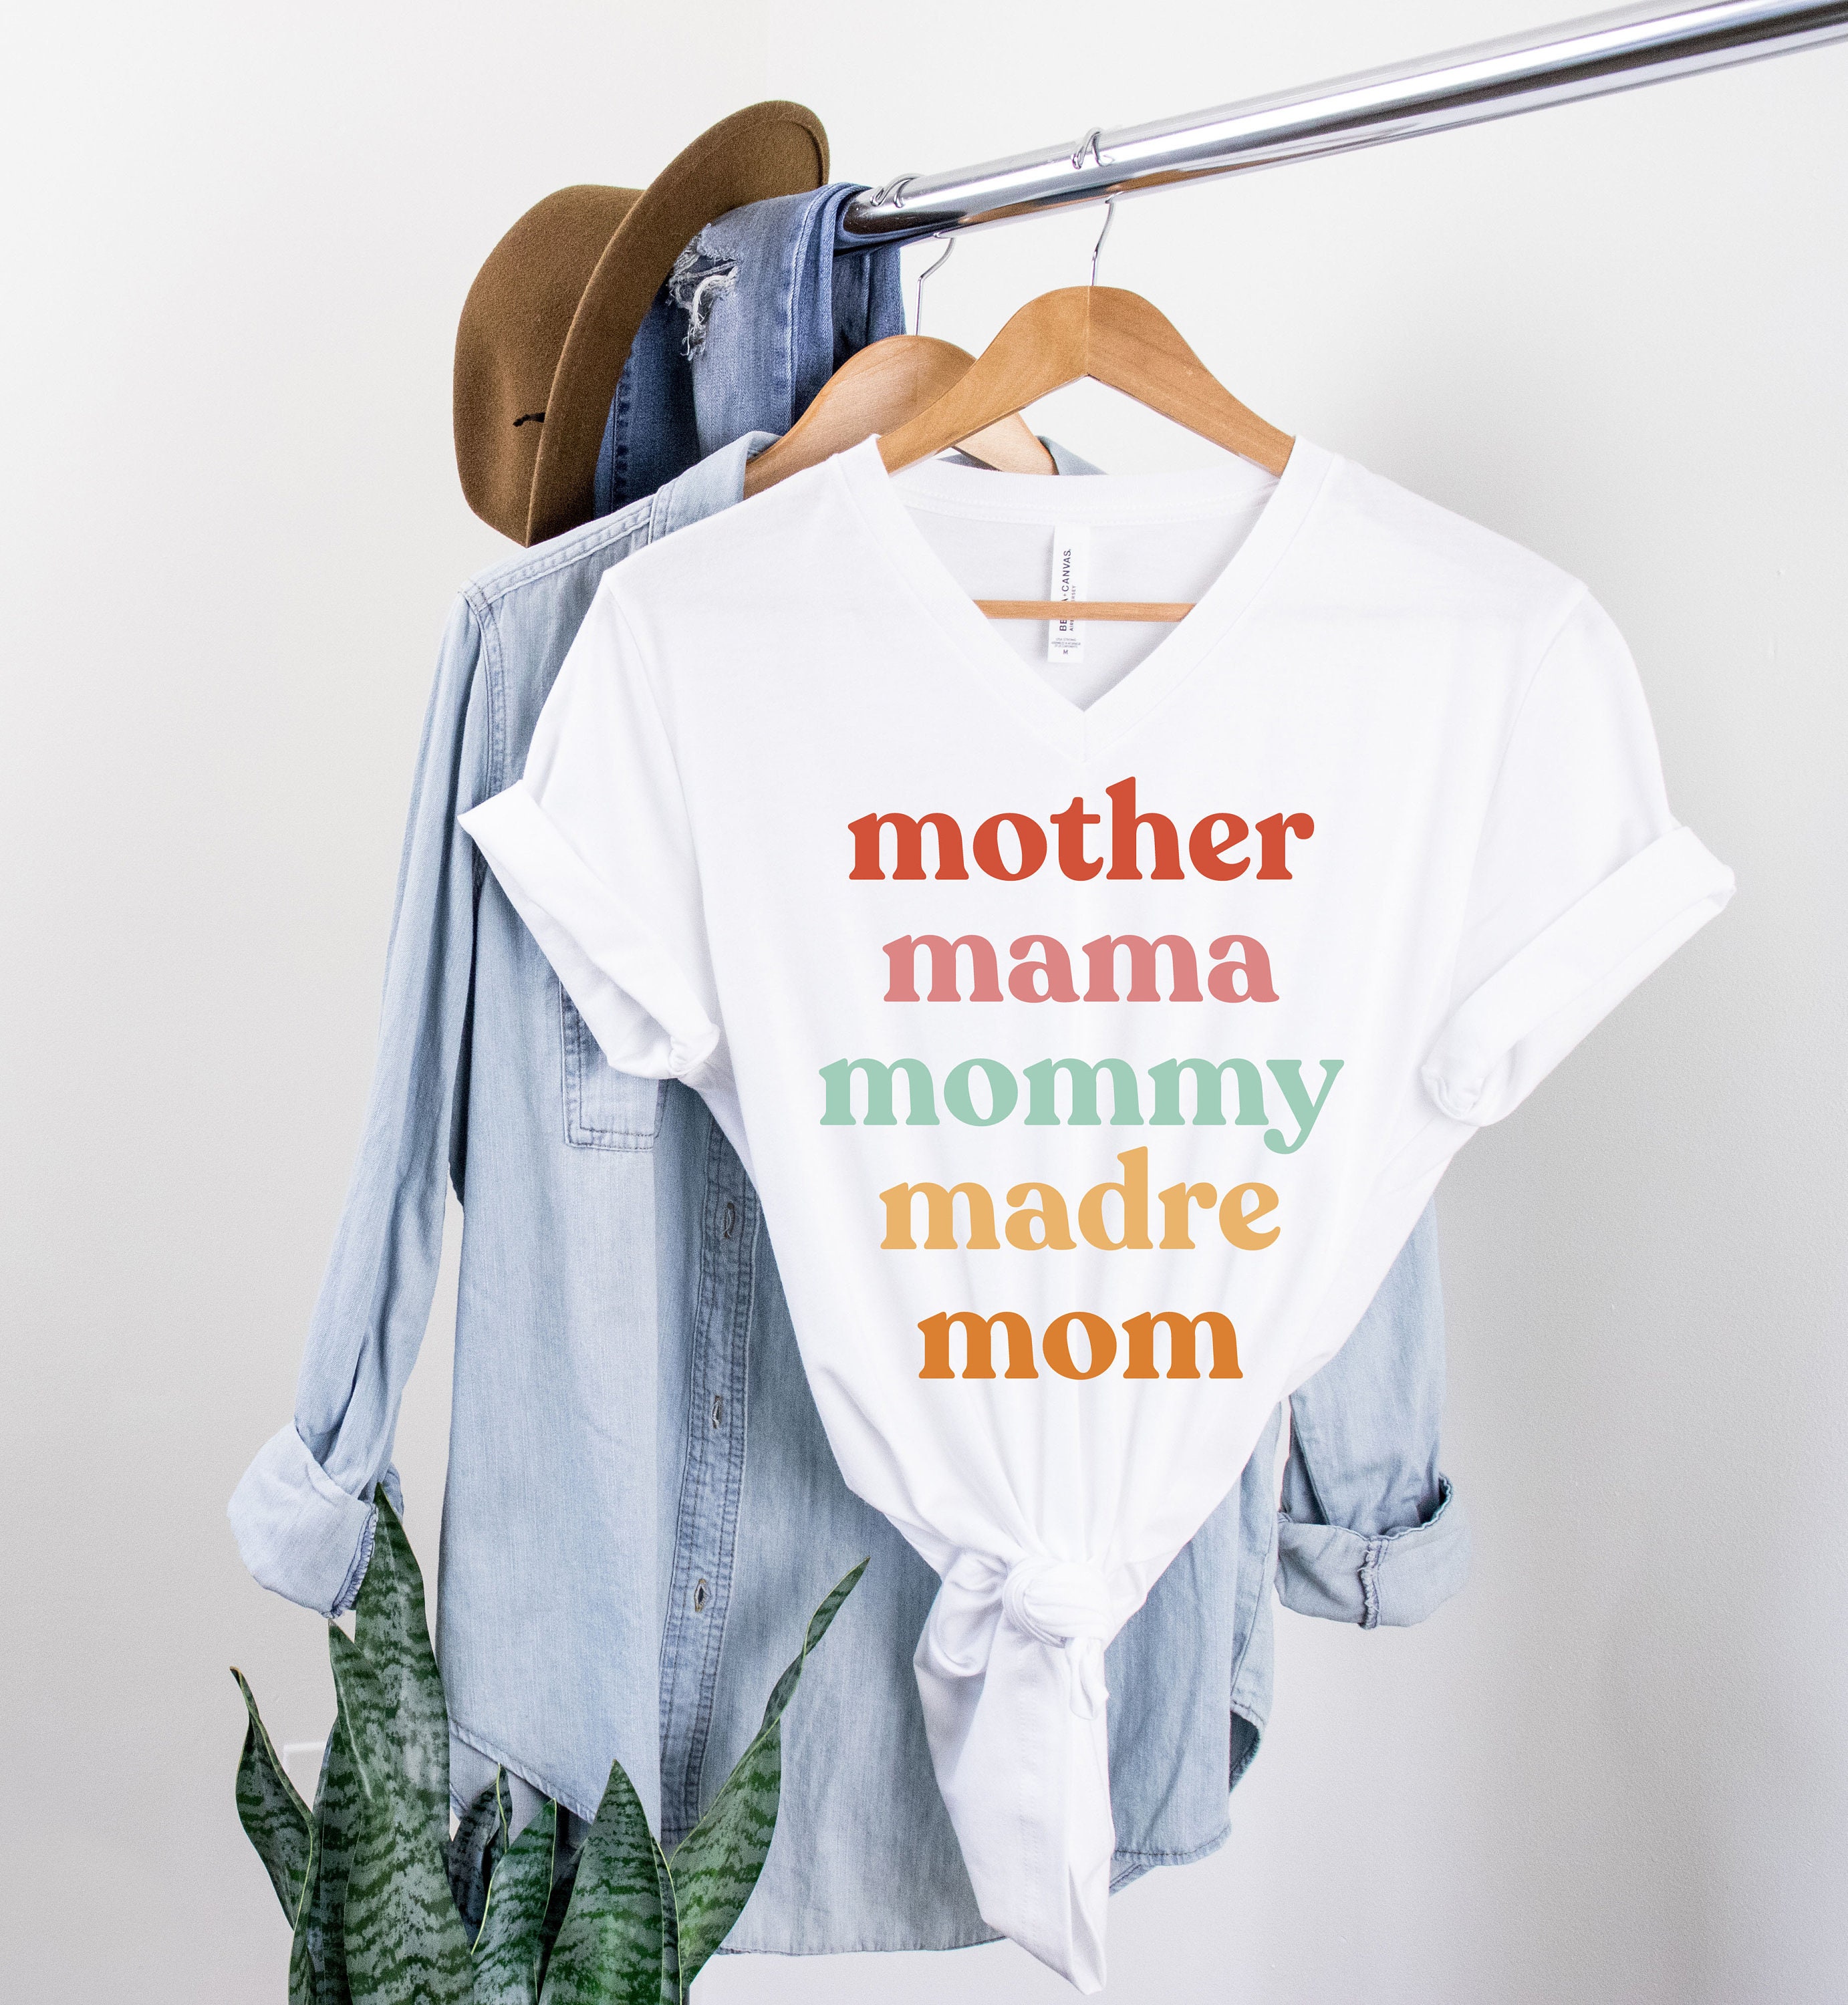 Mother Mama Mommy Madre Mom Shirt Pregnant Announcement Cute | Etsy